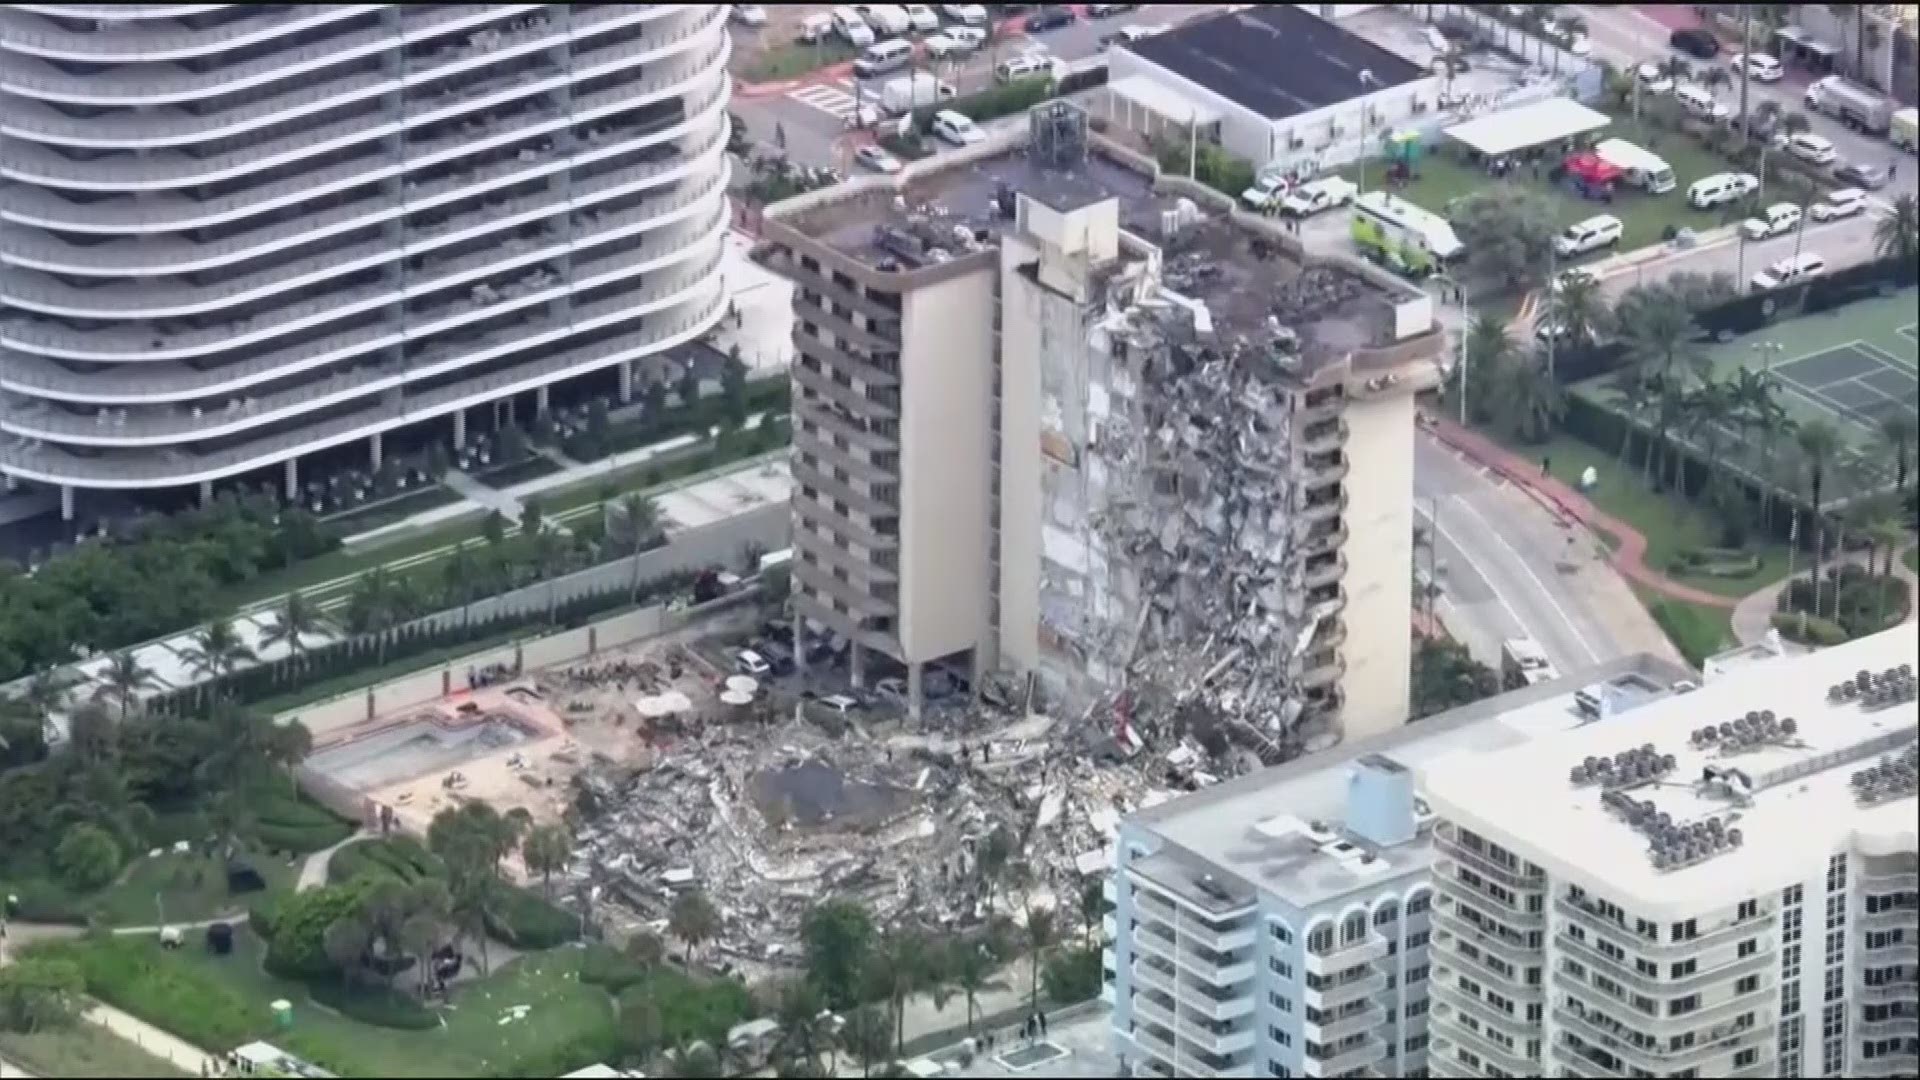 Rescue workers are using dogs in a search for survivors in the twisted wreckage of a Miami-area condo building.